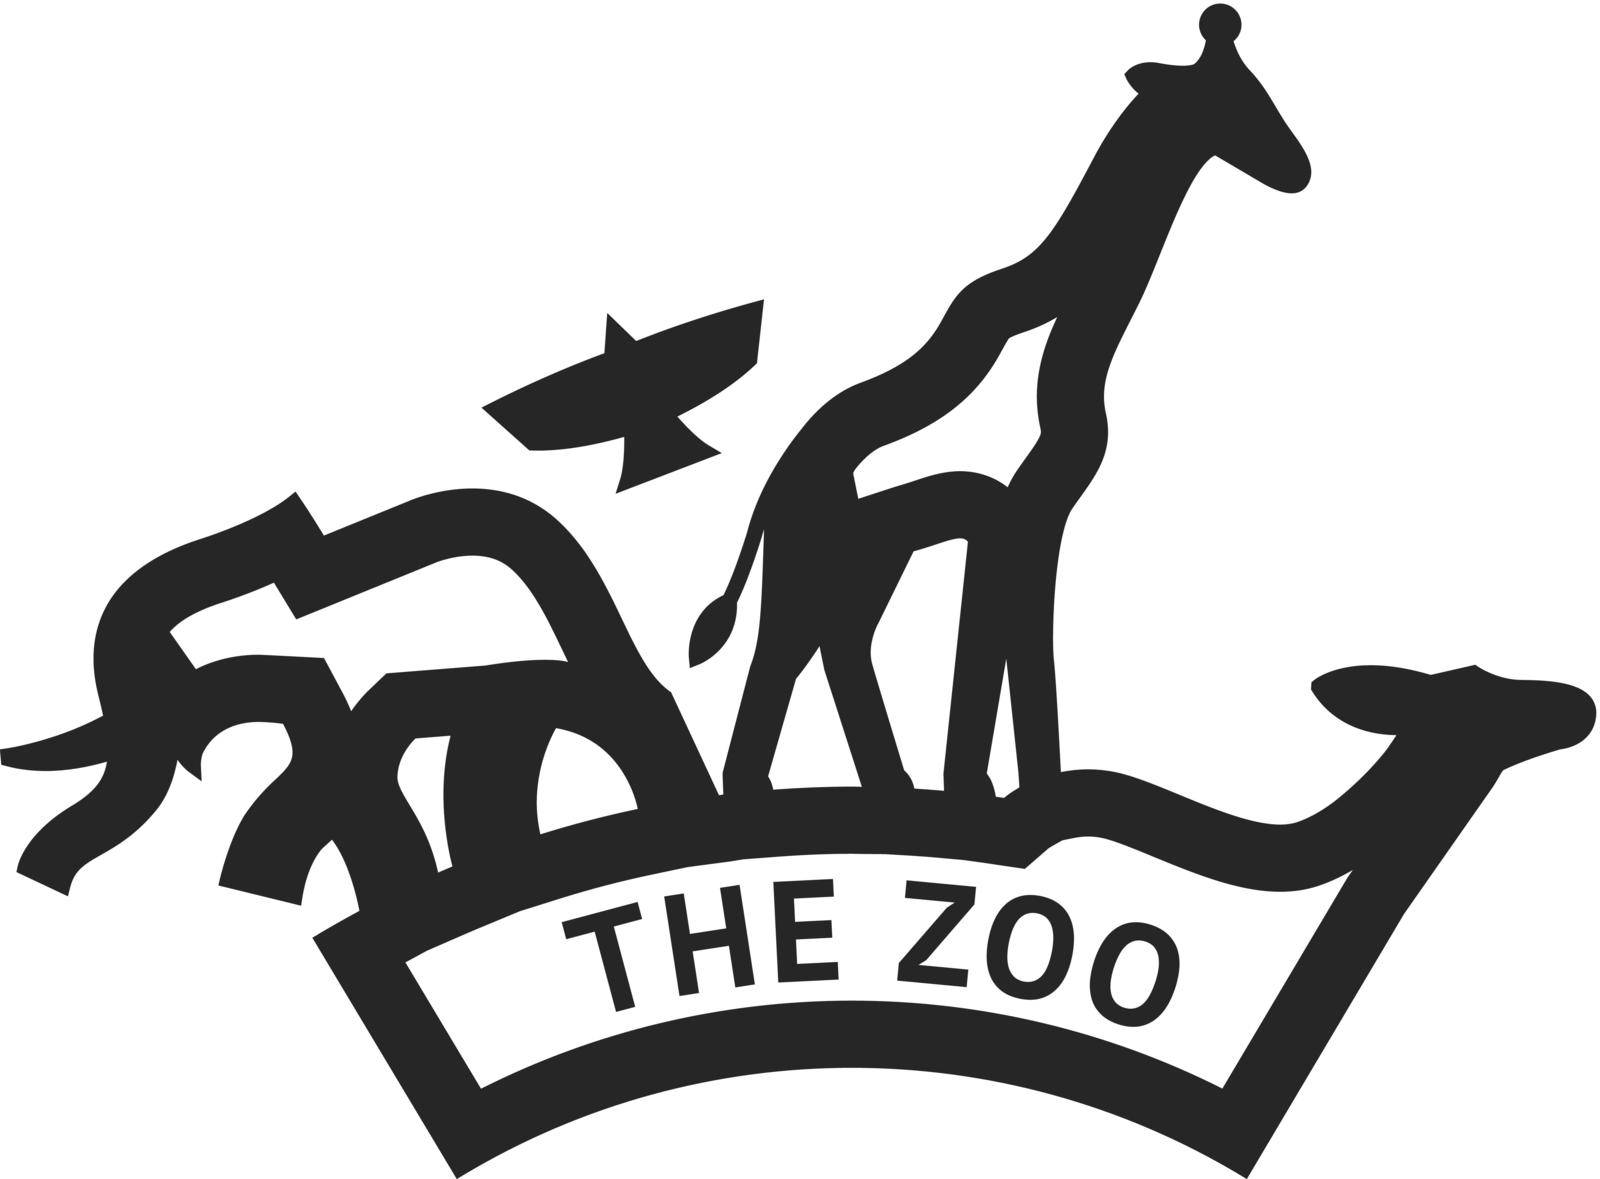 Zoo gate icon in thick outline style. Black and white monochrome vector illustration.